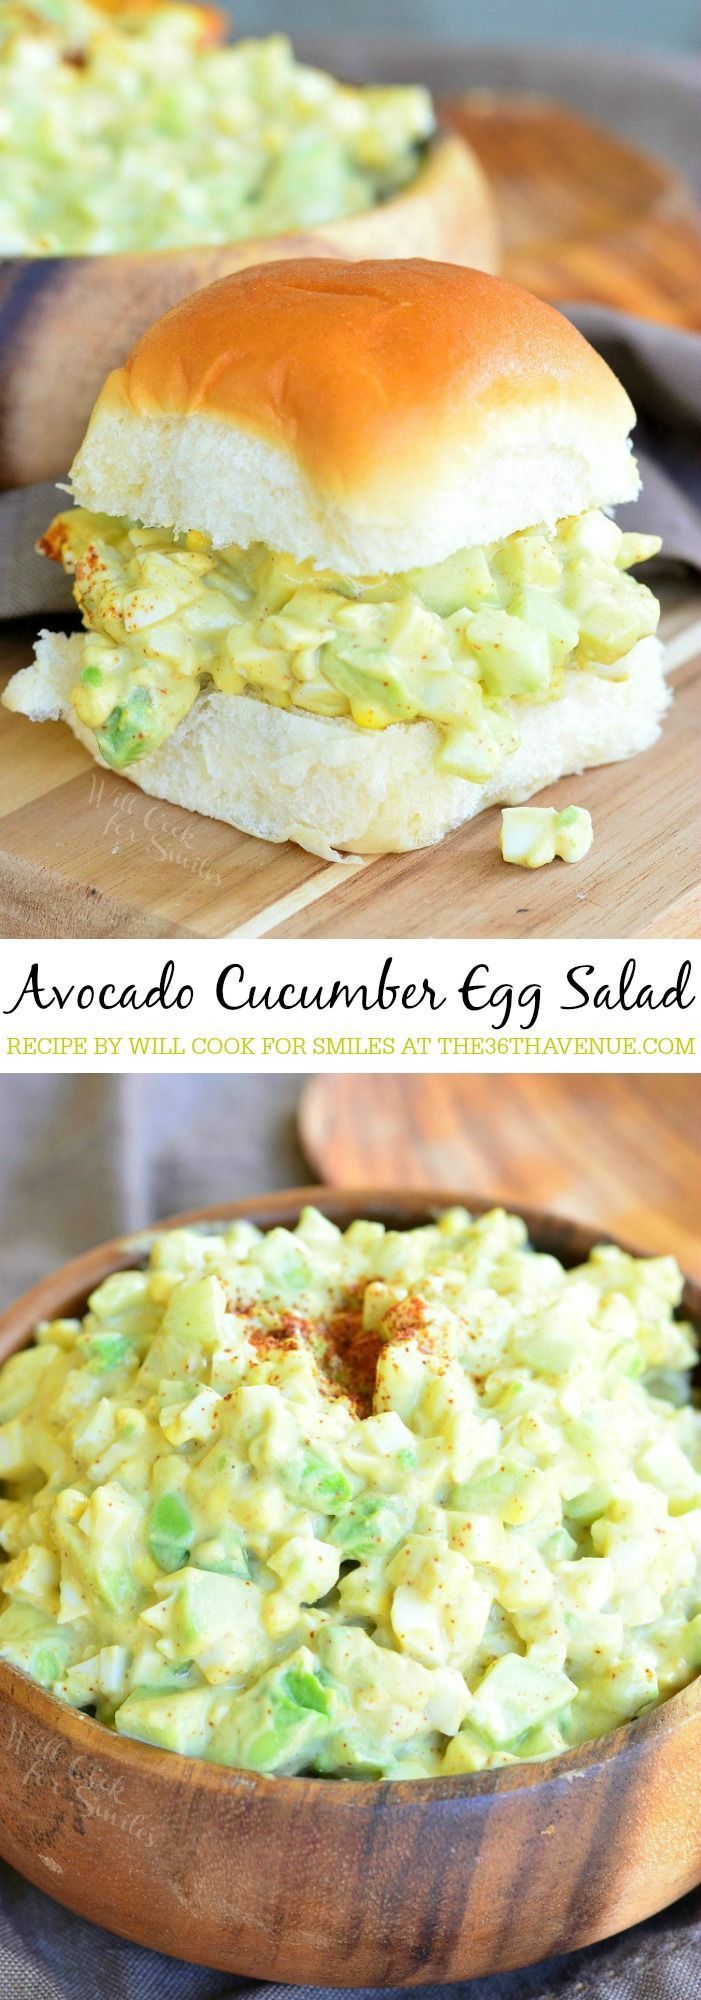 Egg Salad Recipe with avocado and cucumber. Easy to make and delicious! #egg_salad_recipes